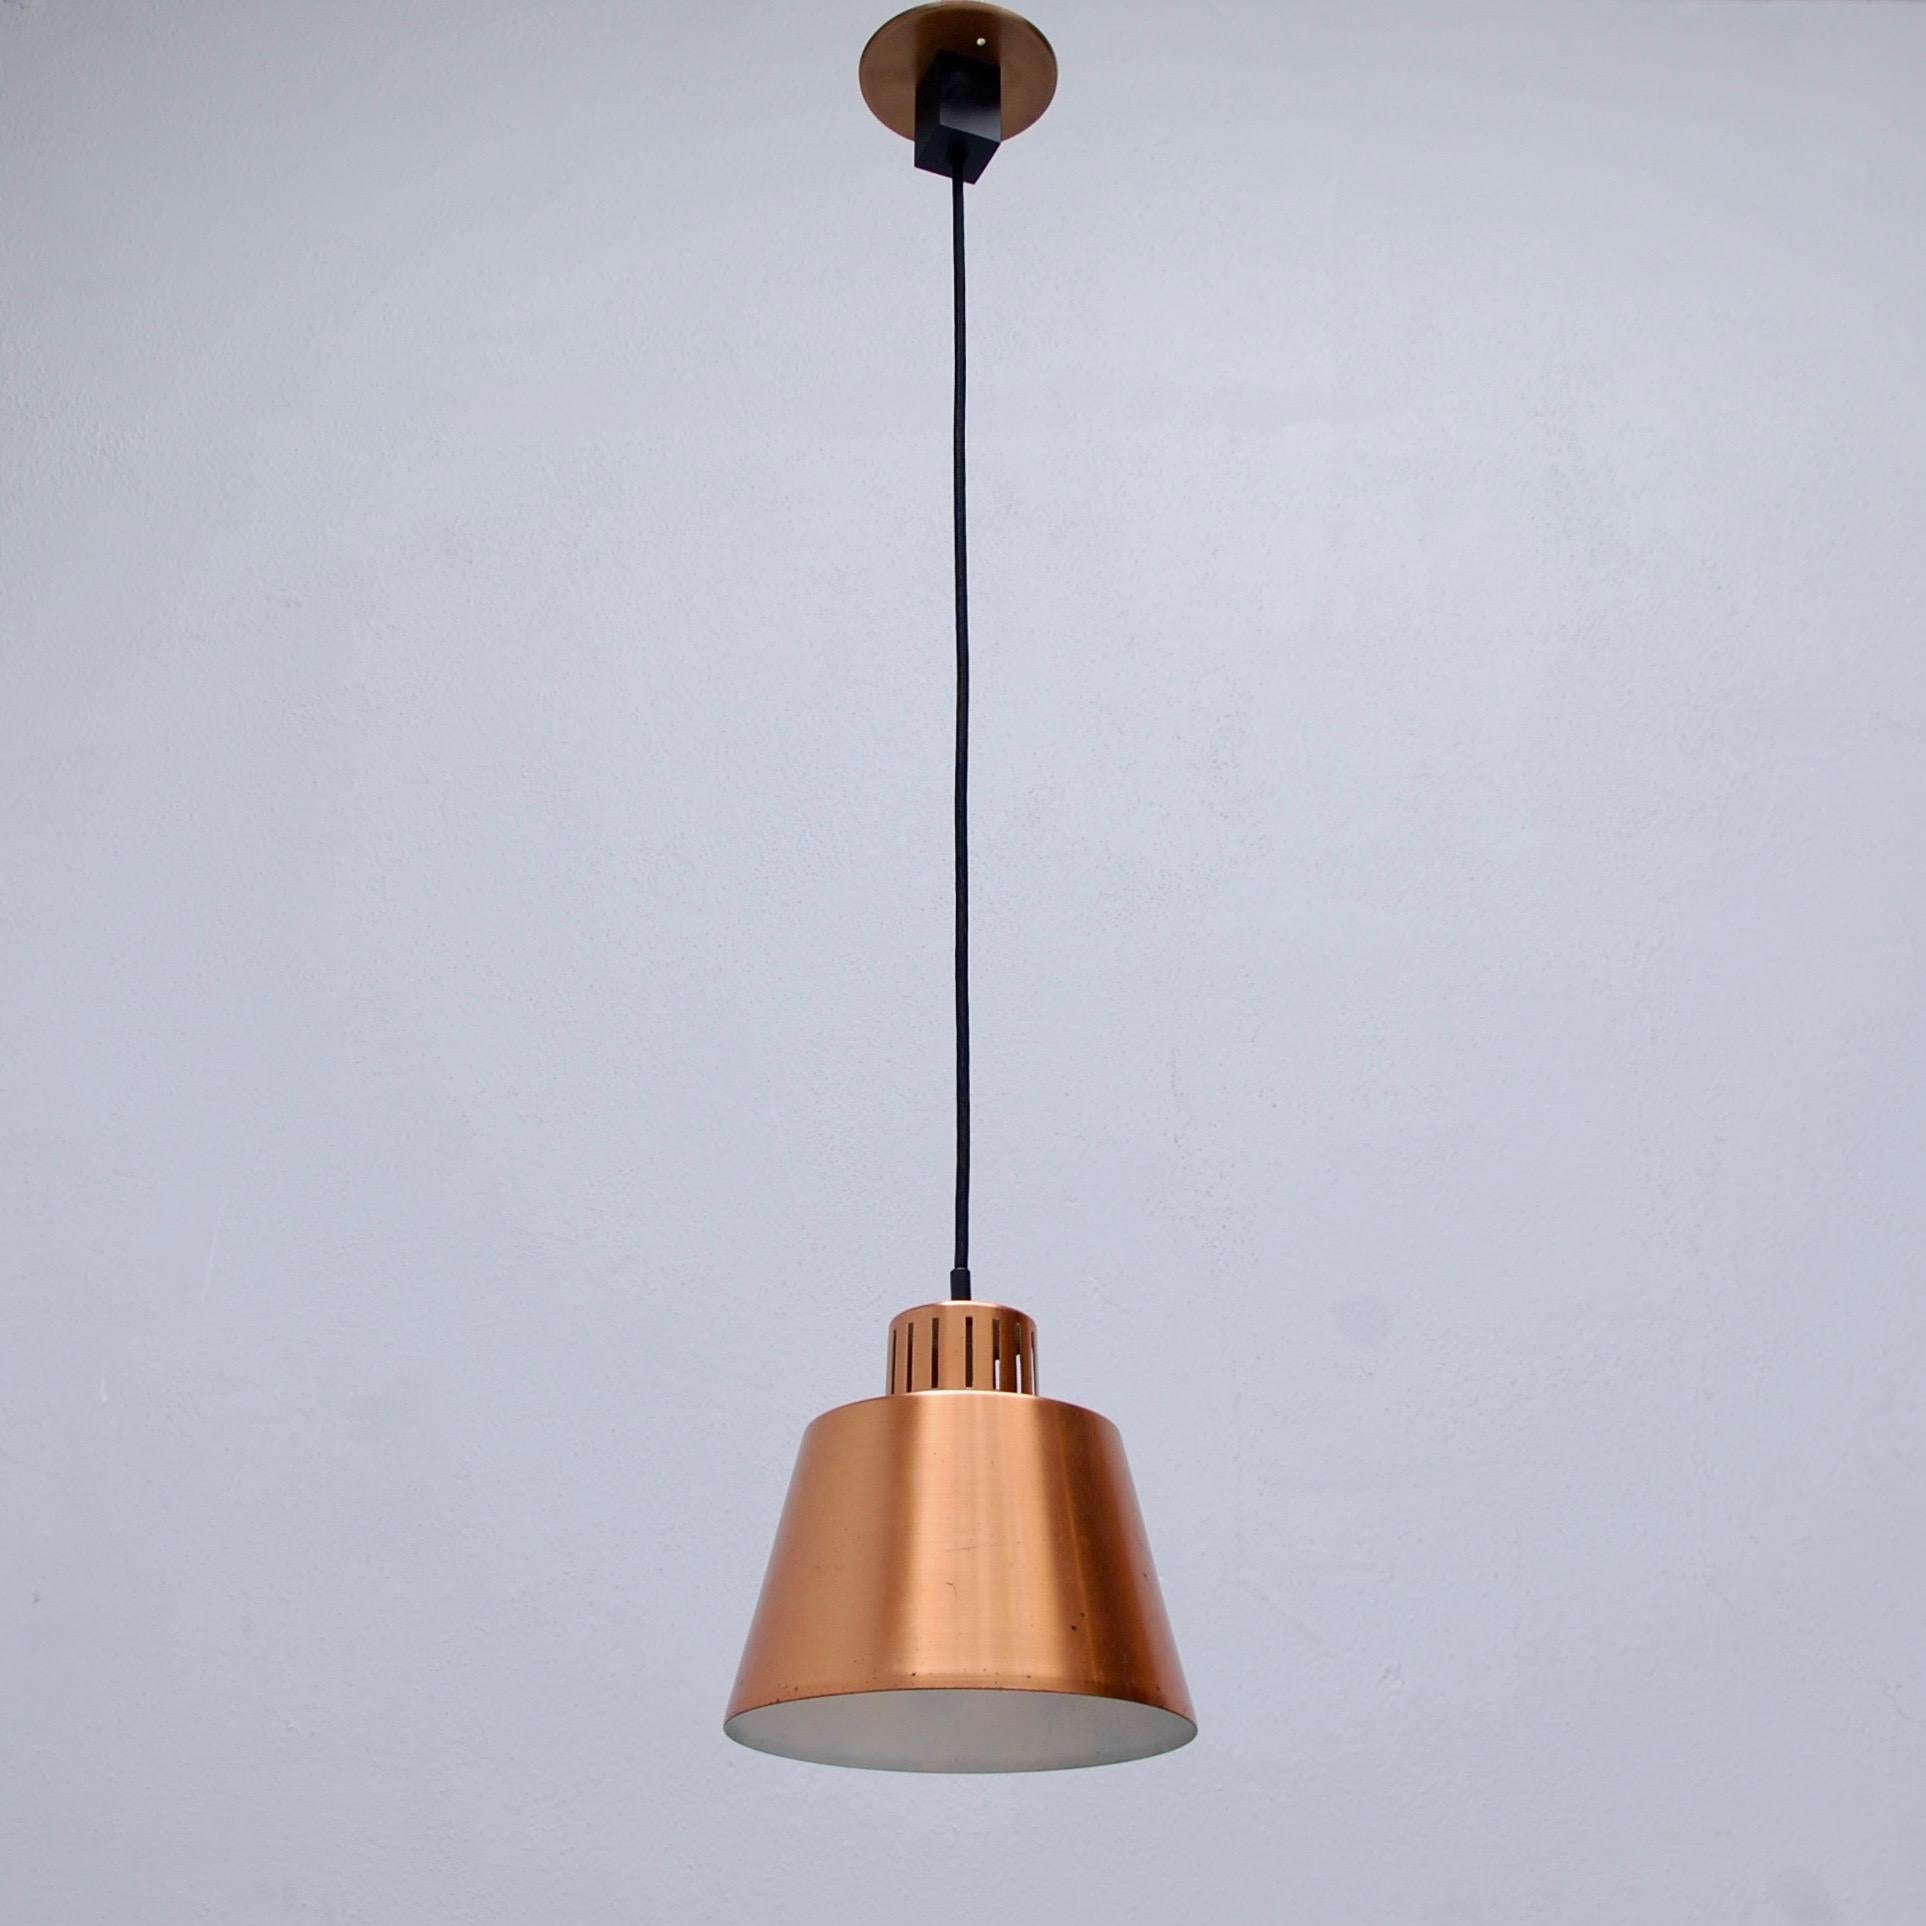 Four (4) beautiful copper pendants by Stilnovo, Italy, 1950s. Original aged copper finish. Wired for use in the US. Current OAD can be adjusted upon request. Single E26 medium based light socket per pendant Light bulb included. Priced